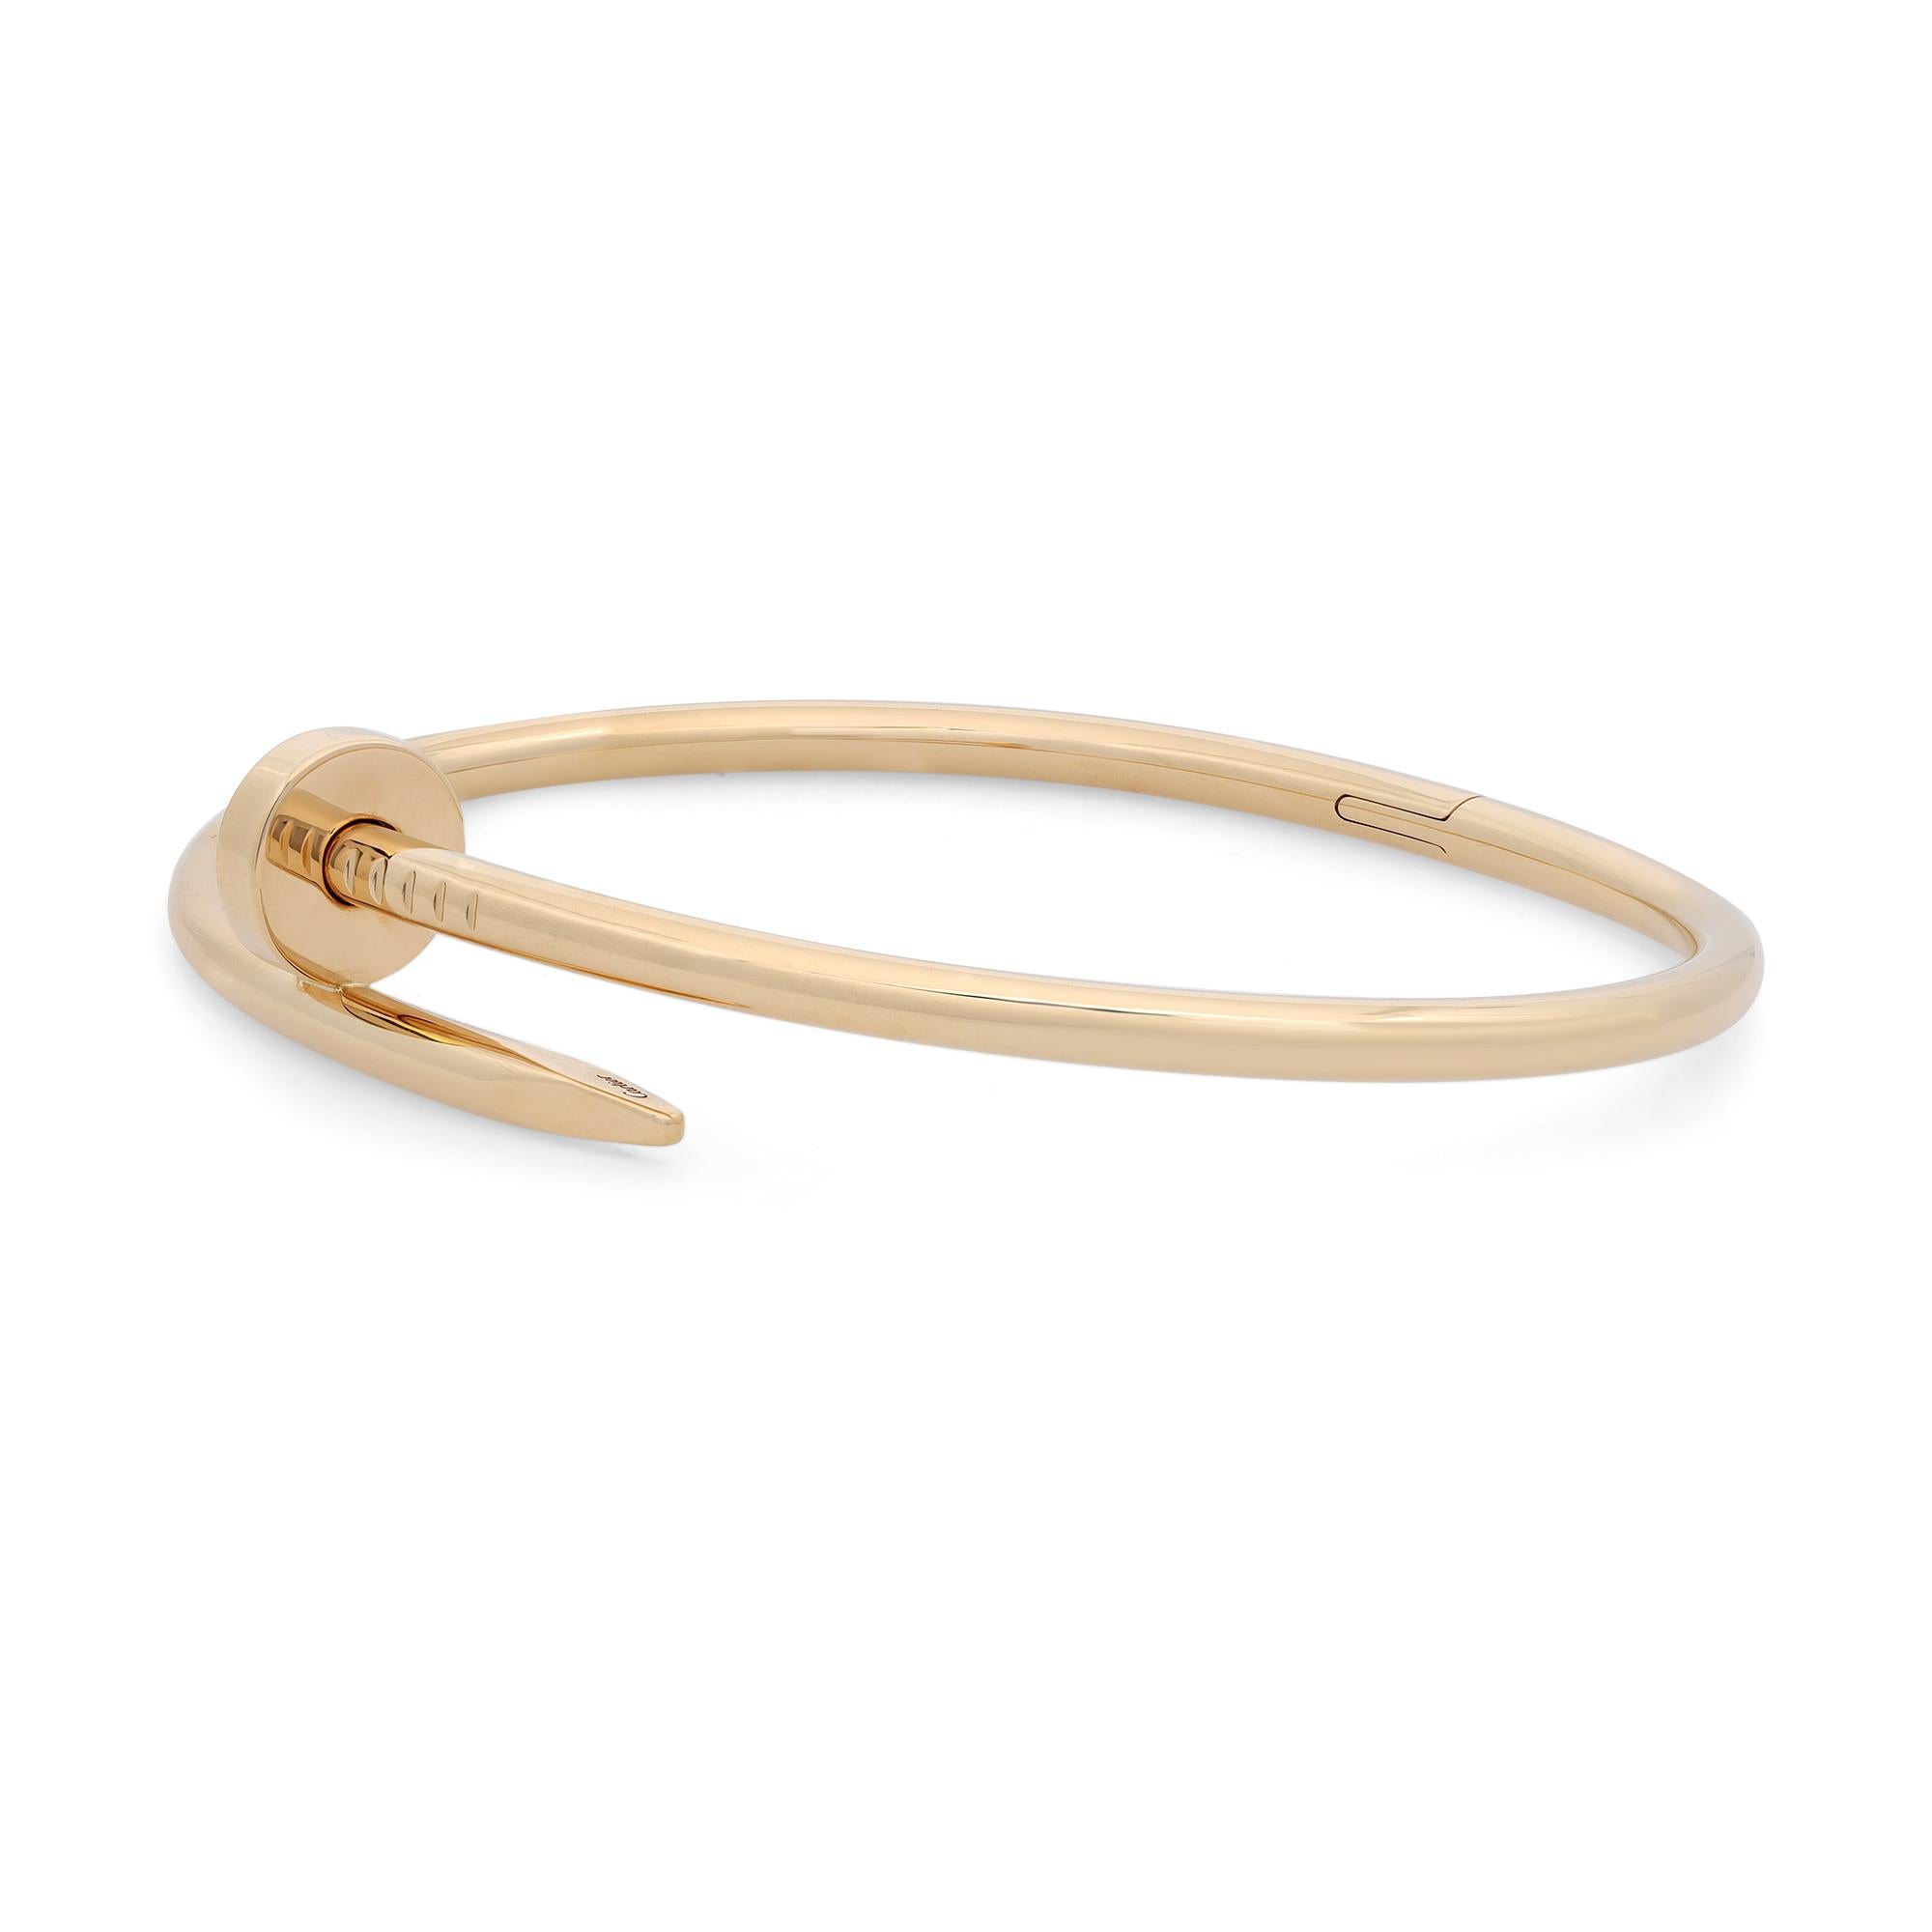 Cartier Juste Un Clou bracelet, crafted in 18k yellow gold. Size 20. Width: 3.5mm. Excellent pre-owned condition. Comes with an original box and paper.